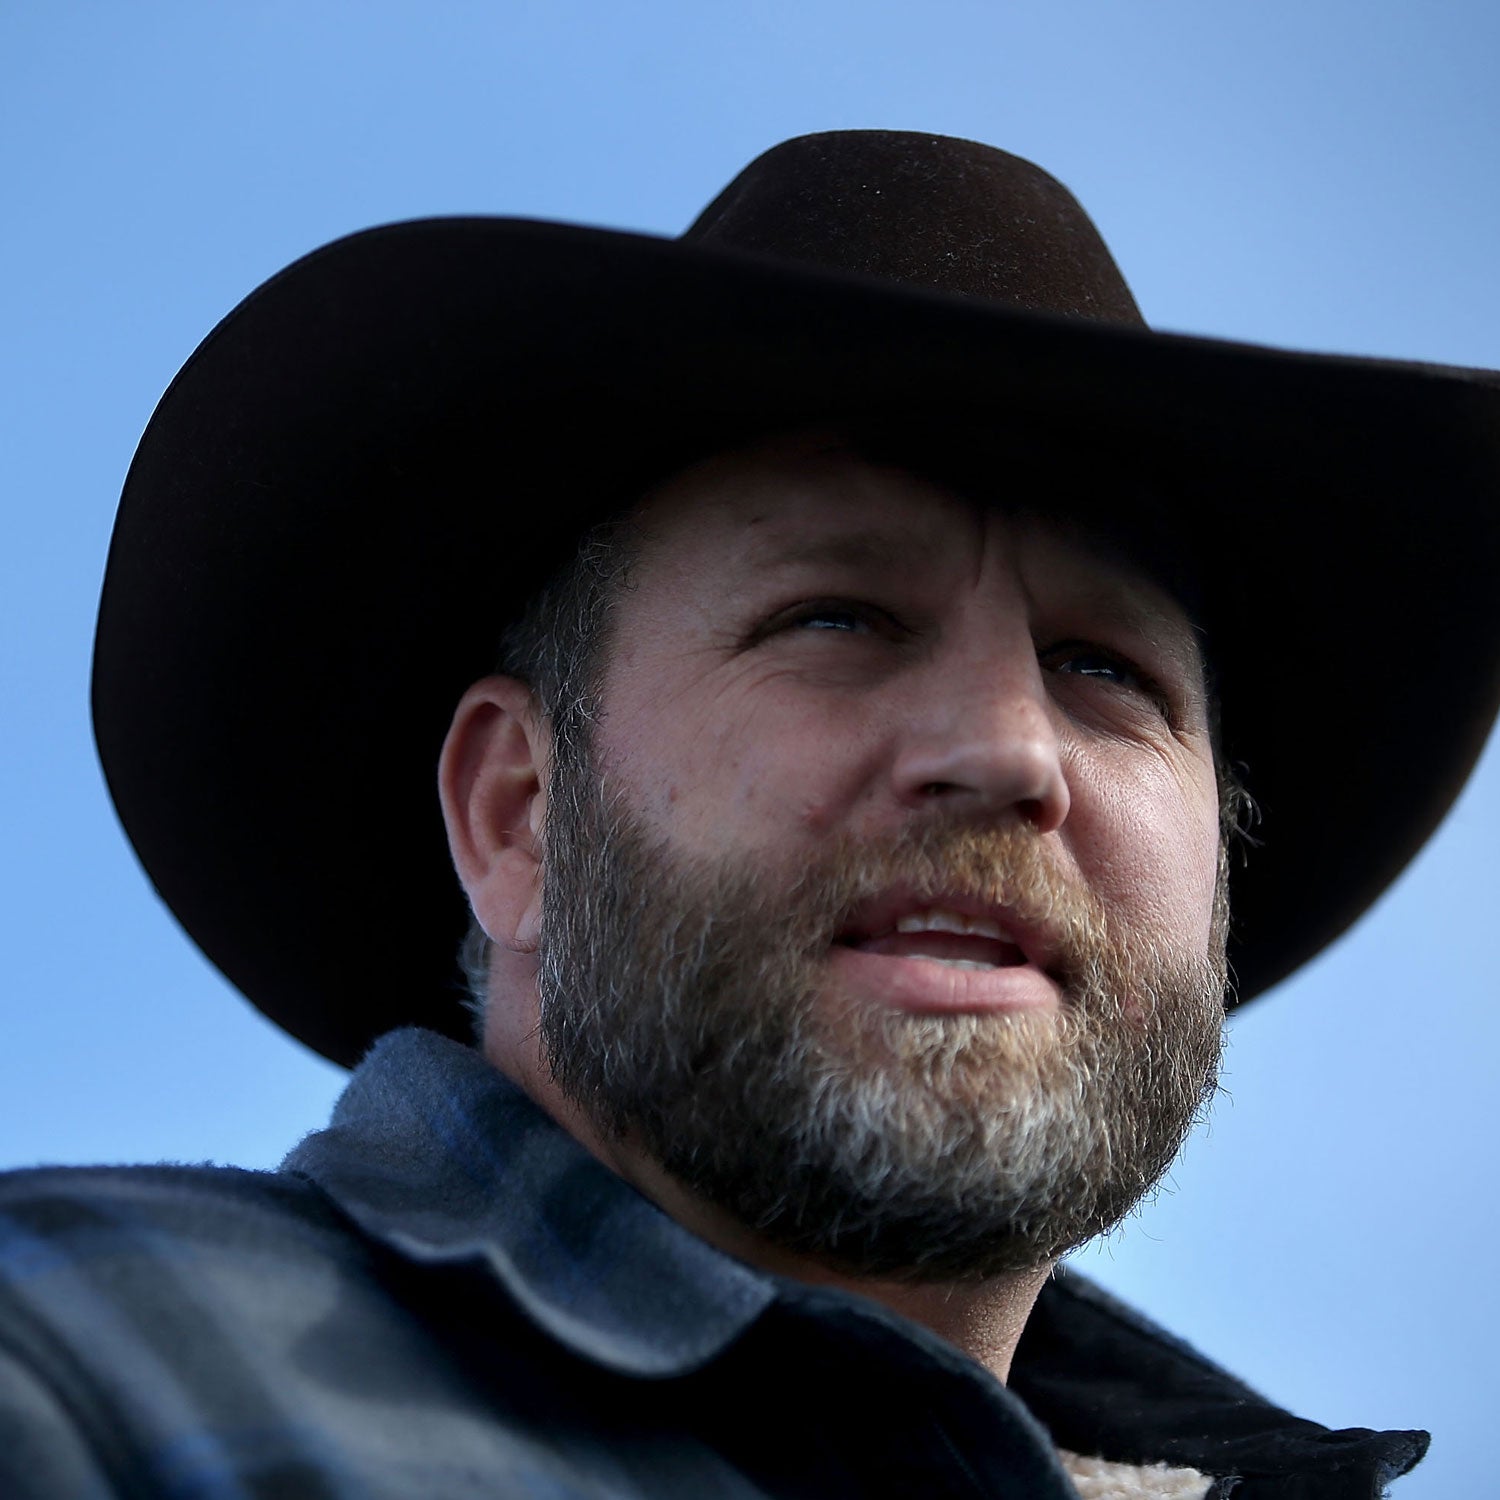 The Religious Ideology Driving the Bundy Brothers